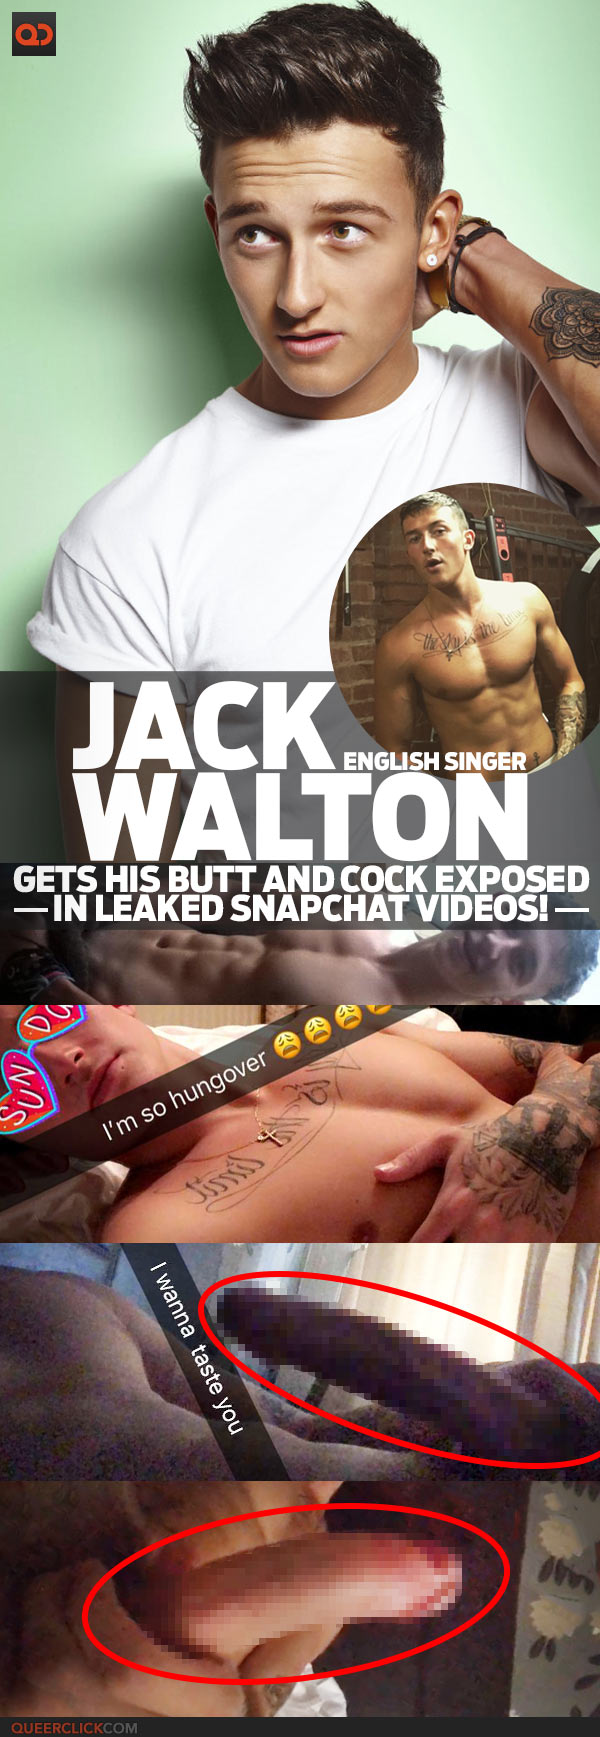 Jack Walton, English Singer, Gets His Butt And Cock Exposed In Leaked Snapchat Videos!